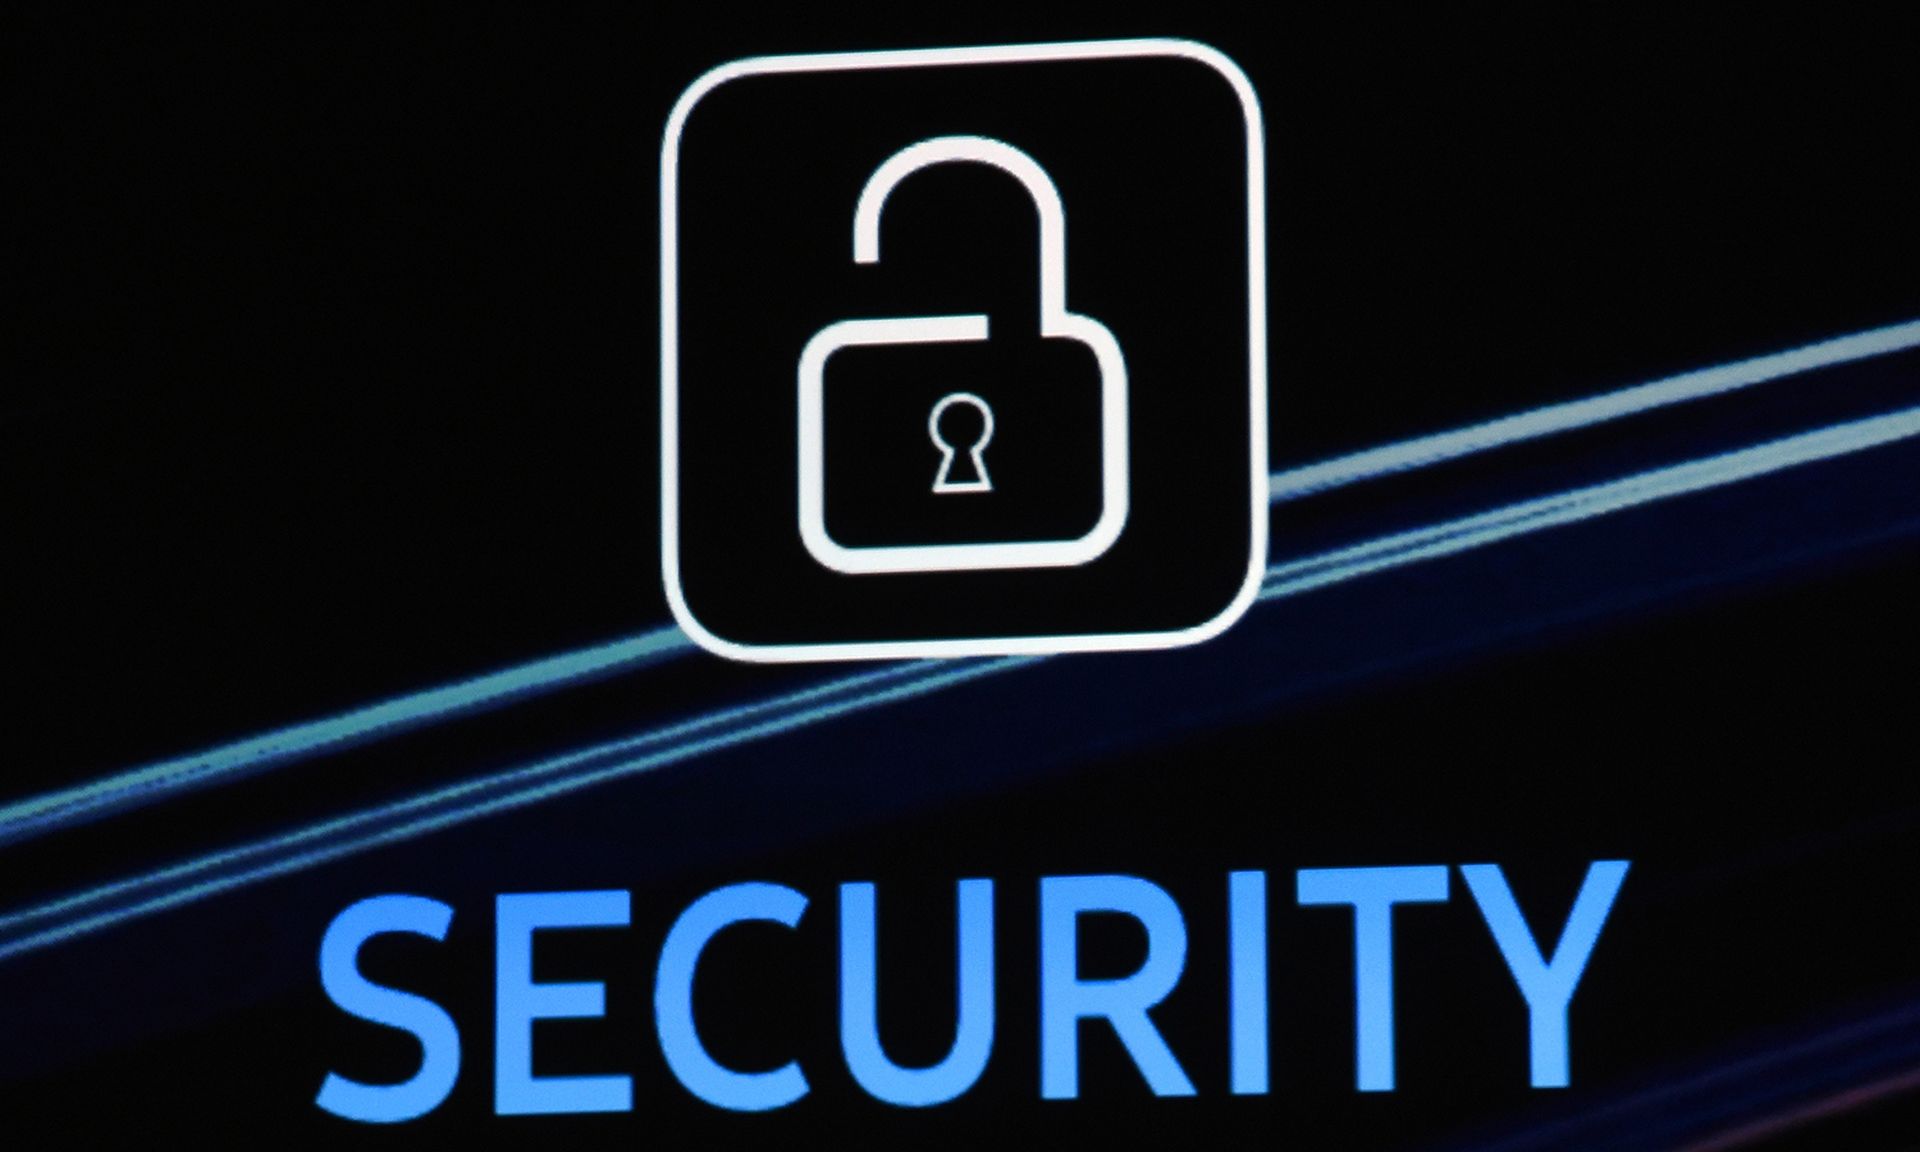 A security logo is shown on screen.